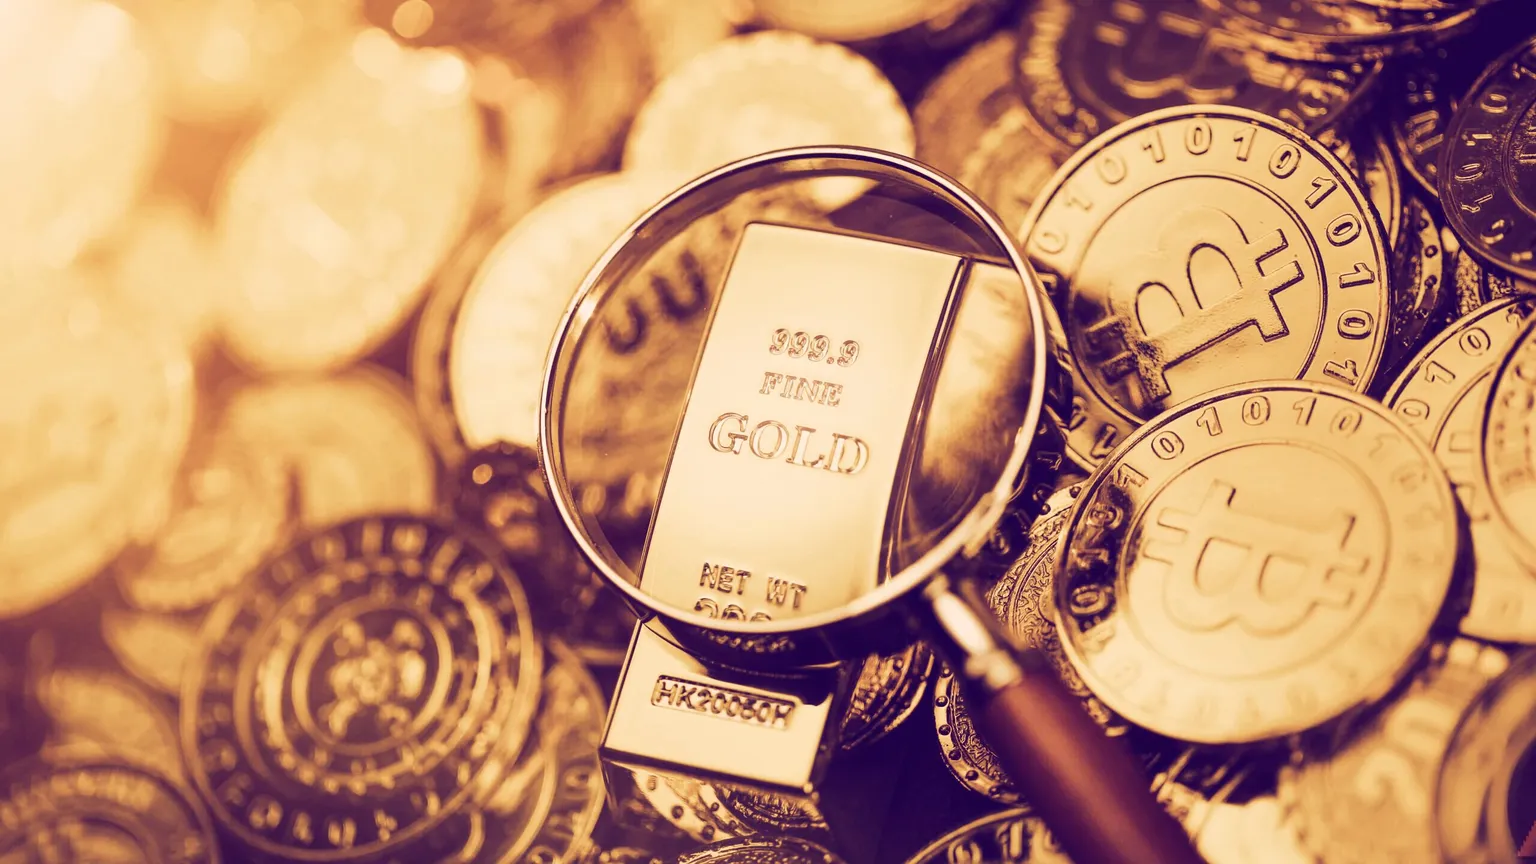 Mike Novogratz says investors must hold more gold than Bitcoin in the current economic climate. Image: Shutterstock